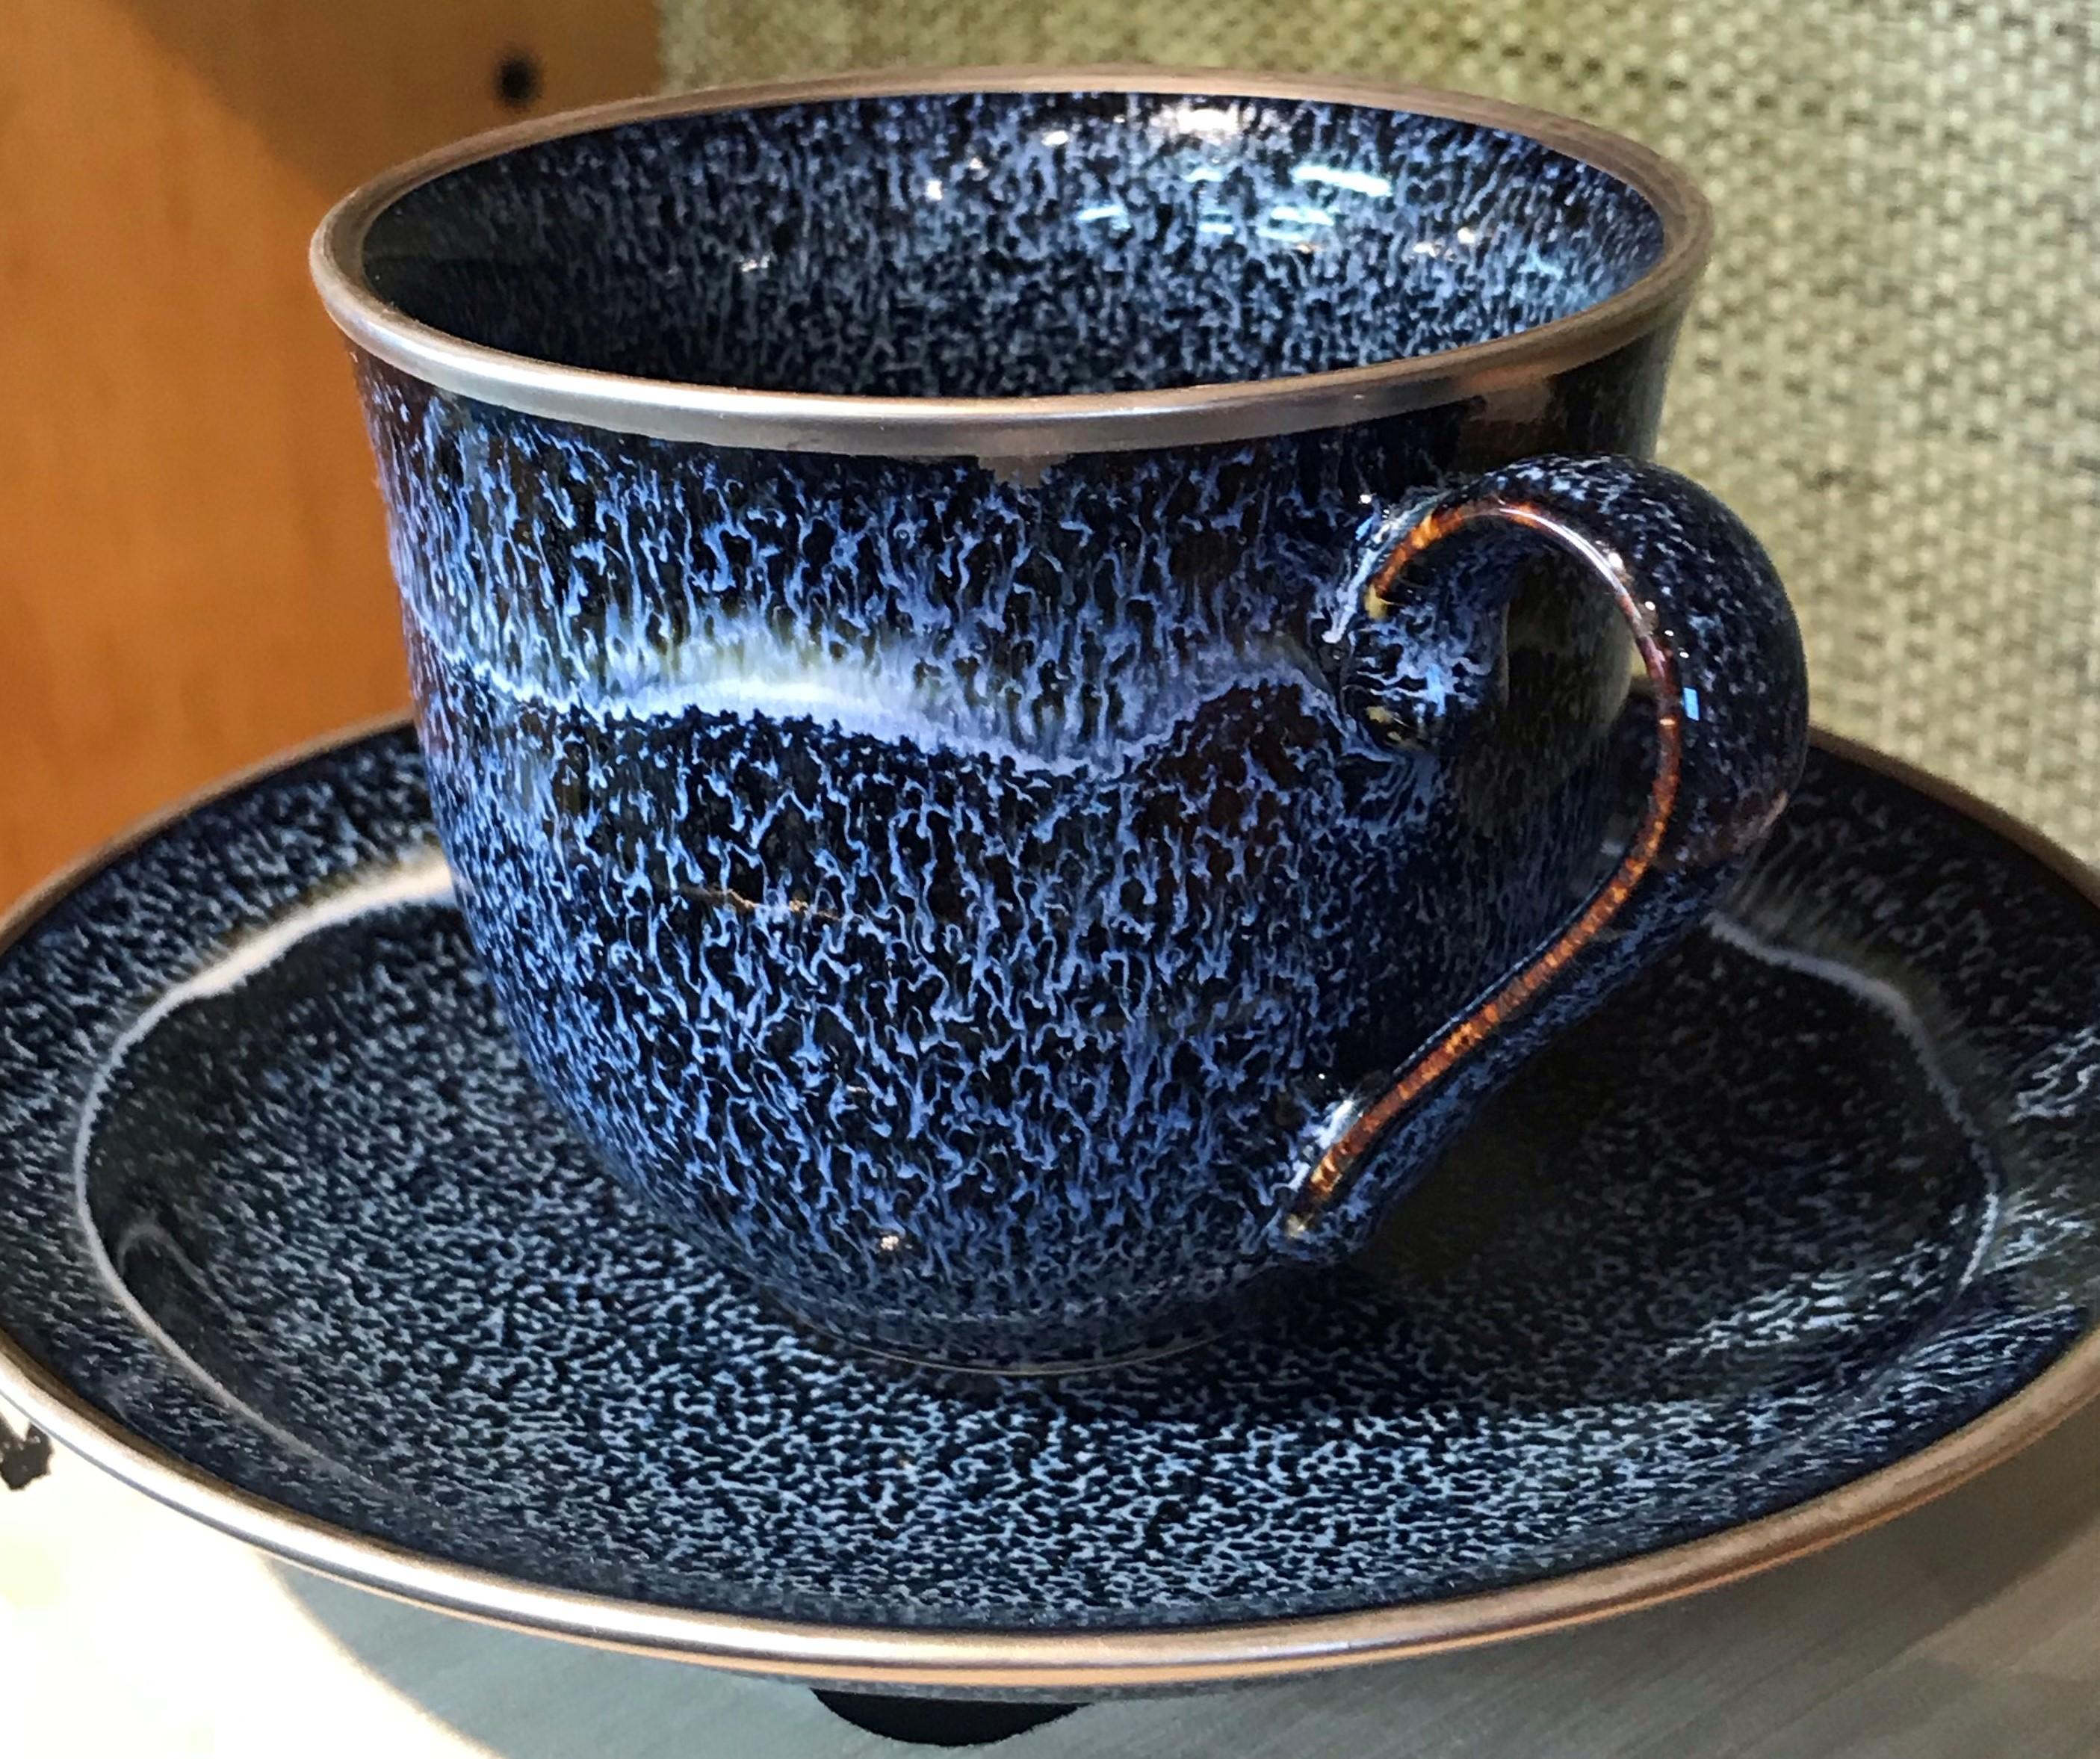 Unique Japanese contemporary platinum-gilded signed porcelain cup and saucer, hand-glazed in stunning signature blue on a beautifully shaped body in black, a signed work from one of the most striking collections by highly acclaimed award-winning